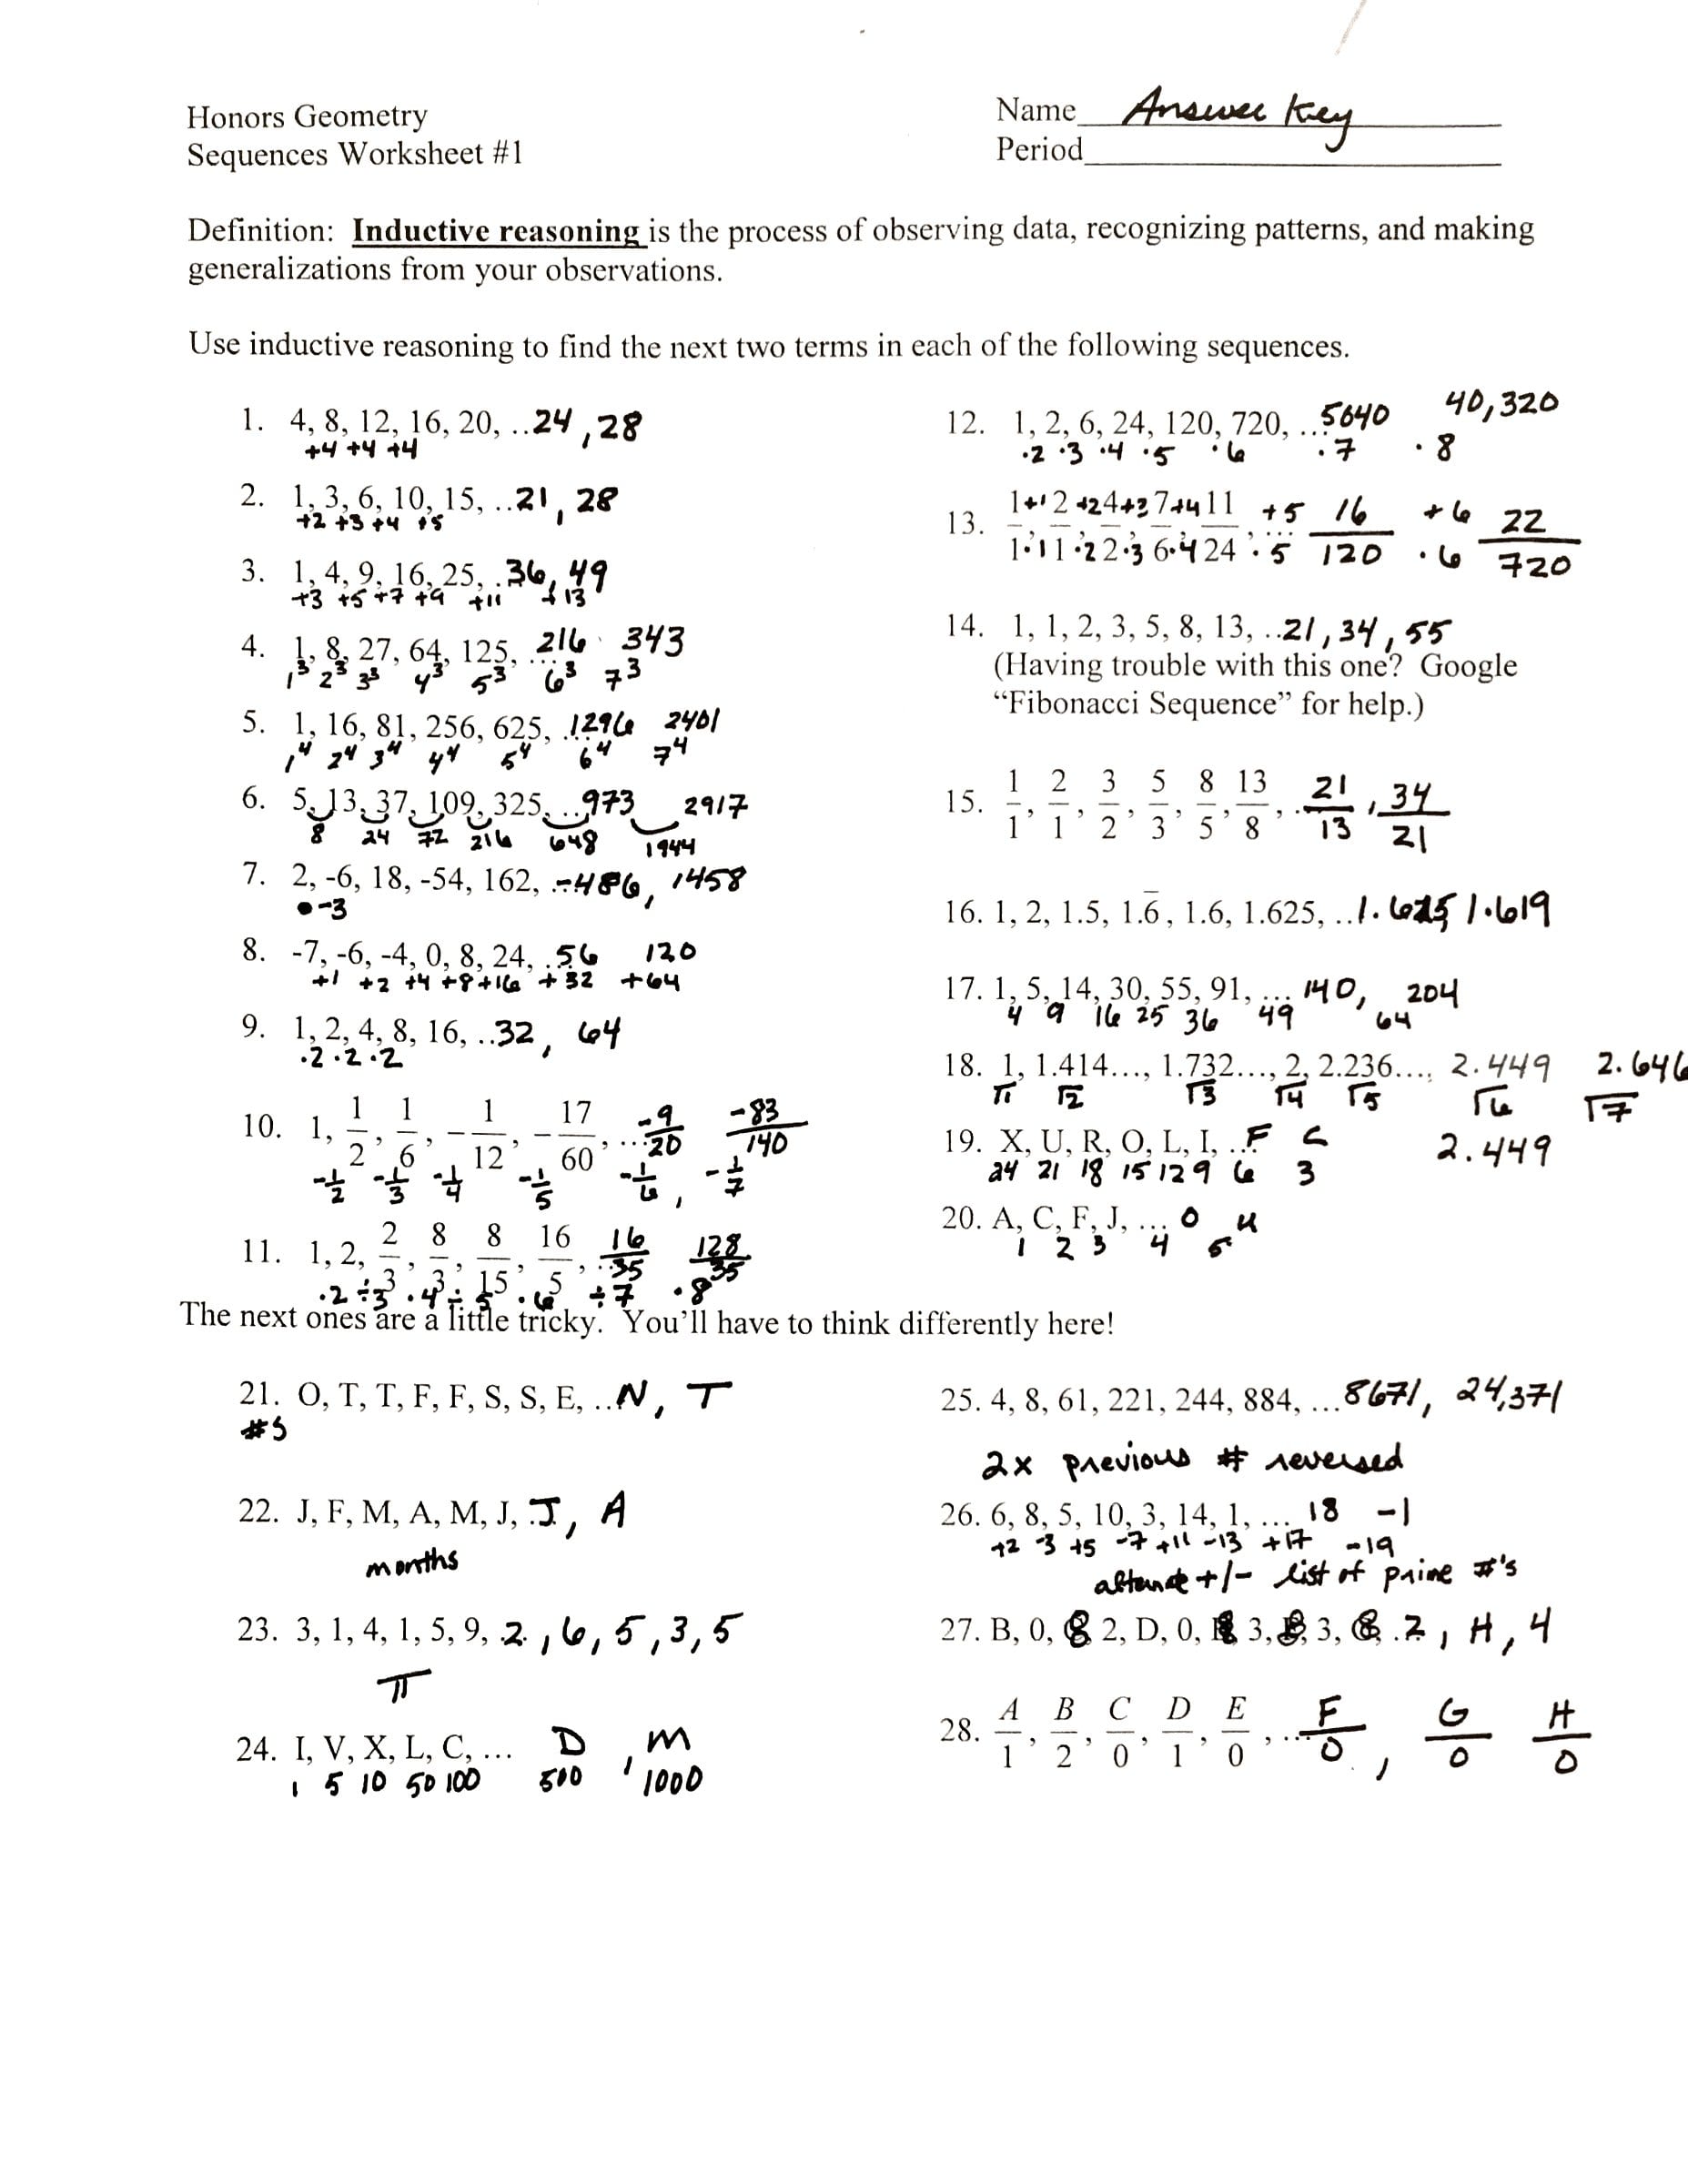 geometric and arithmetic sequences worksheet